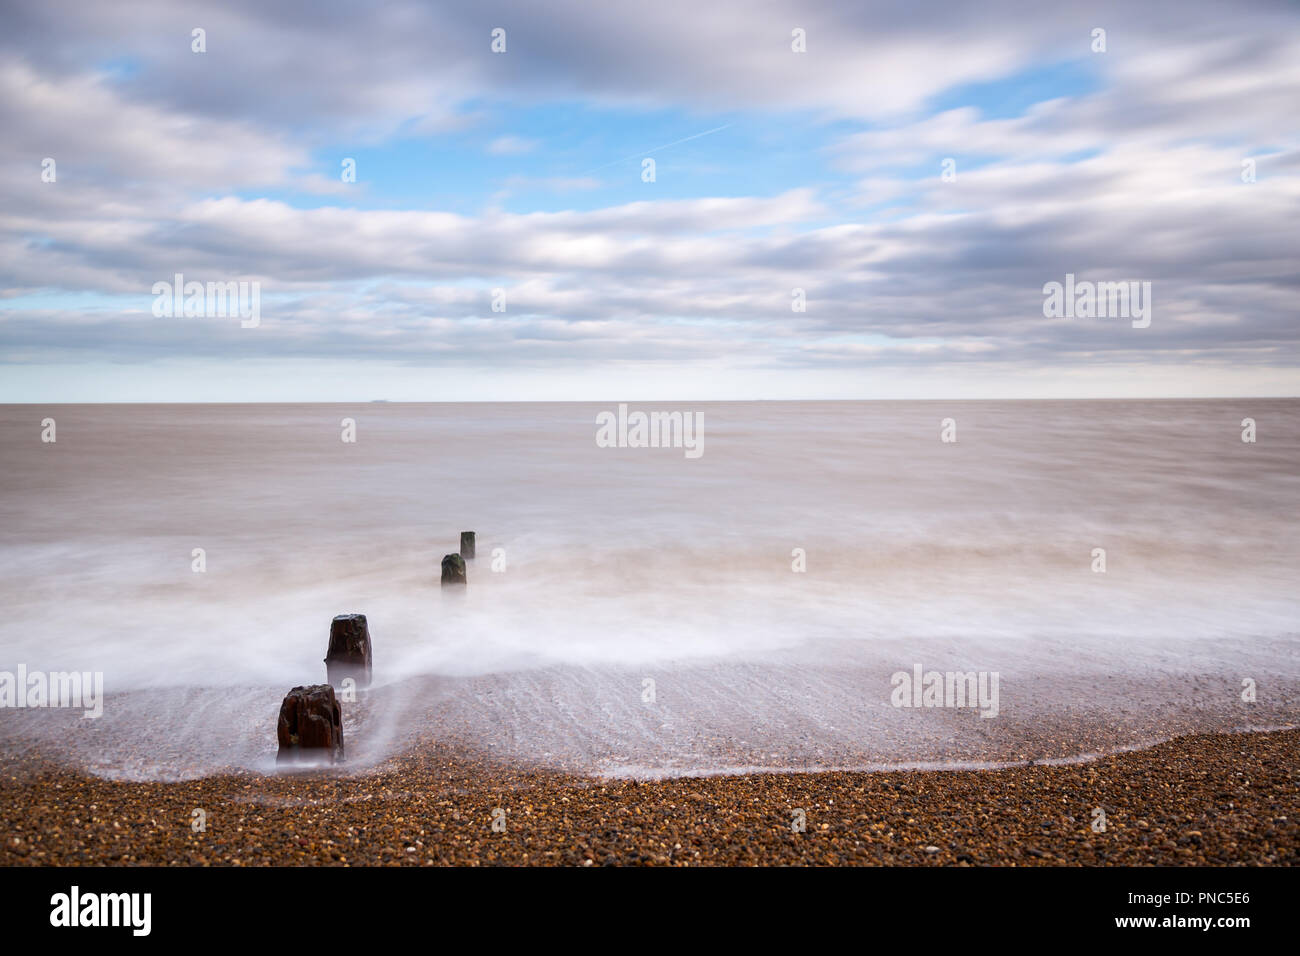 Minimalistic long exposure looking out to sea at Bawdsey, Suffolk, UK. Frame contains a lot of empty space Stock Photo